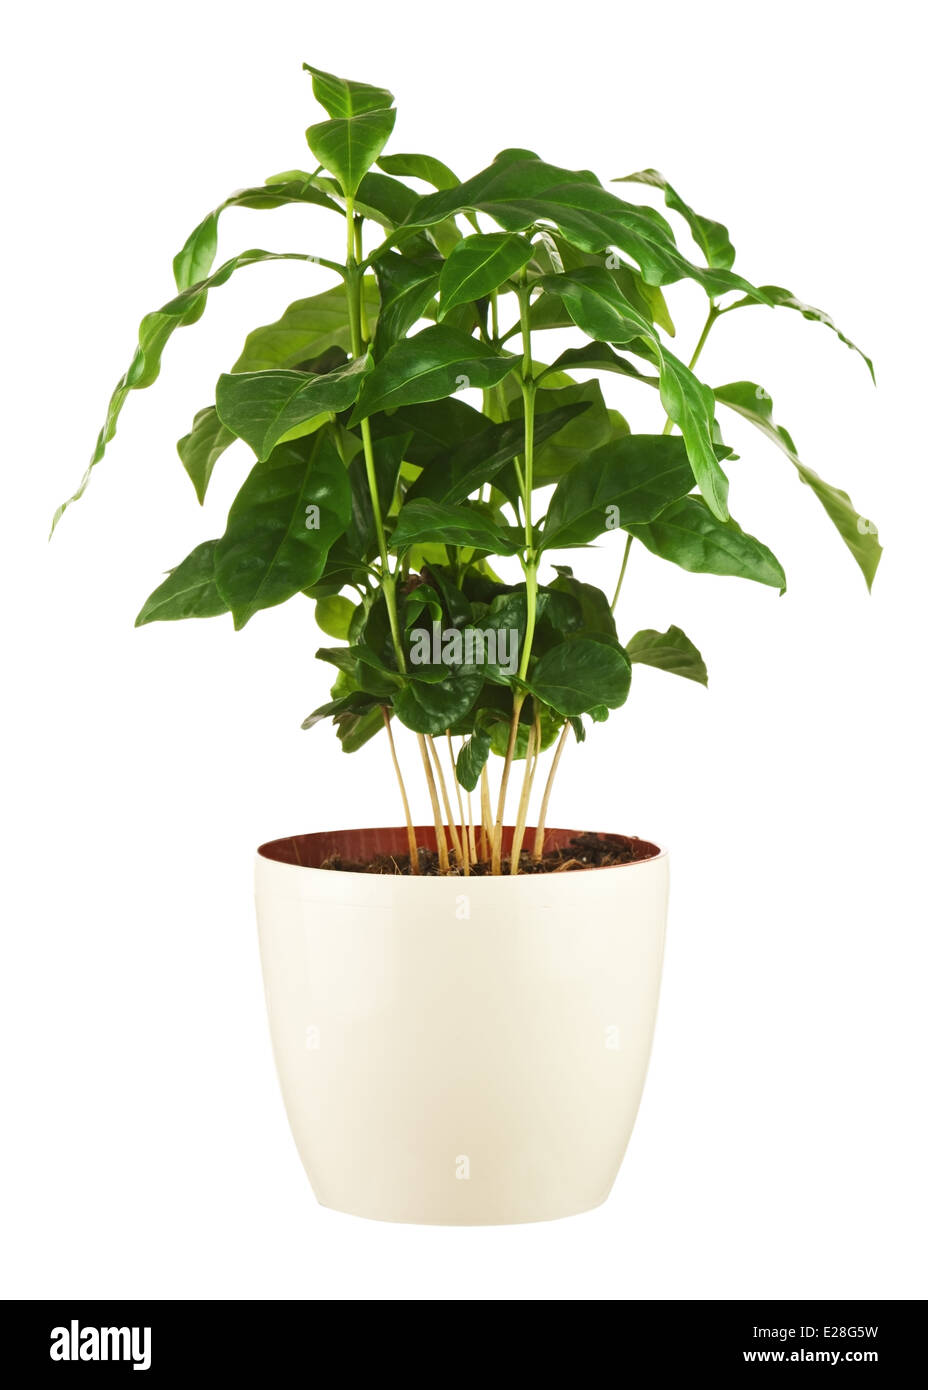 Coffee tree (Arabica Plant) in flower pot isolated on white background. Closeup. Stock Photo